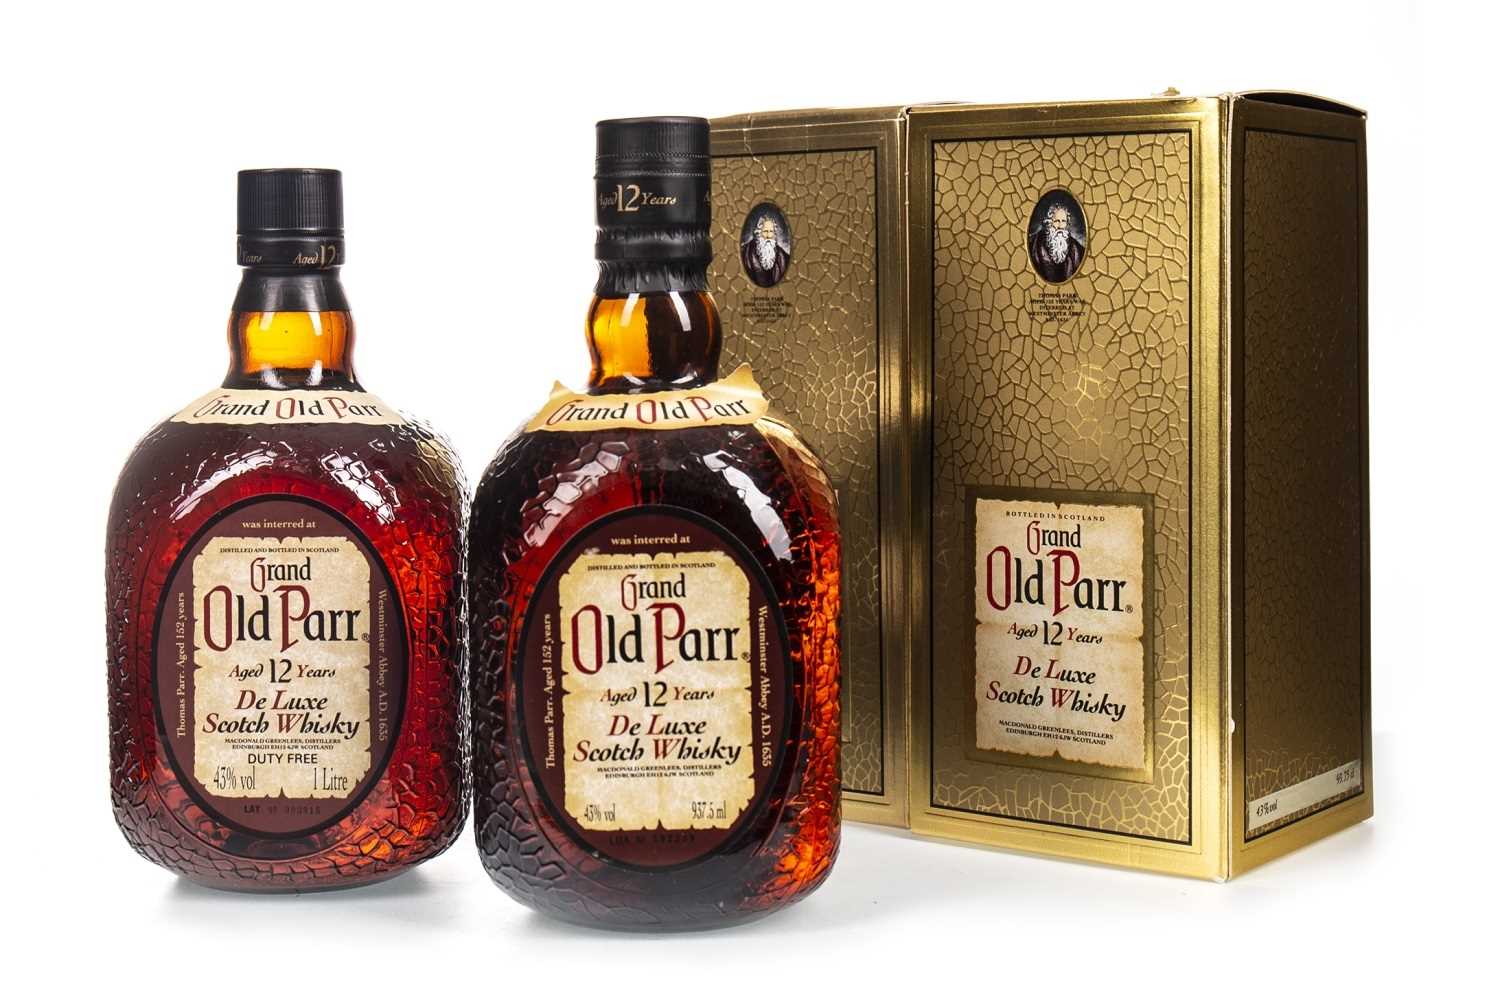 Lot 413 - TWO BOTTLES OF GRAND OLD PARR AGED 12 YEARS